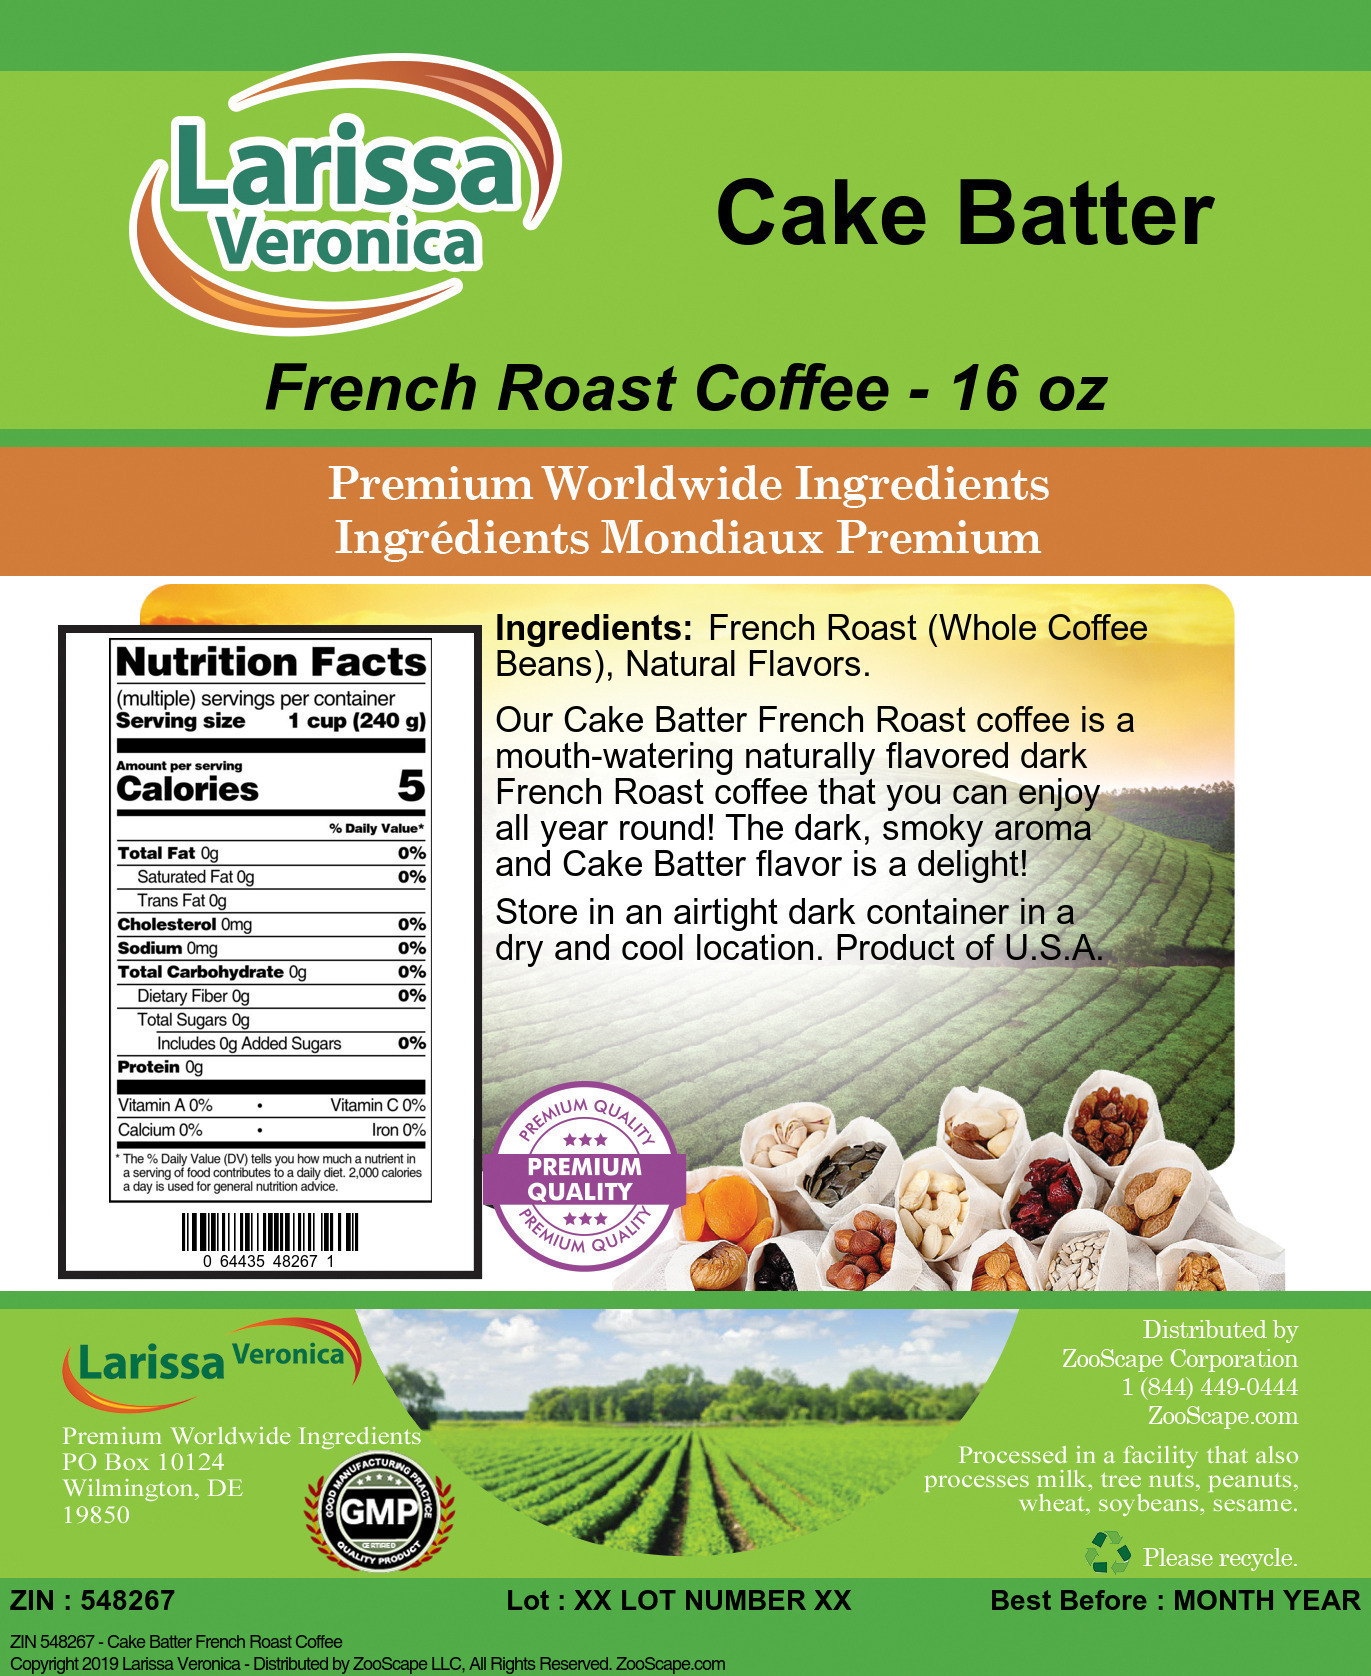 Cake Batter French Roast Coffee - Label